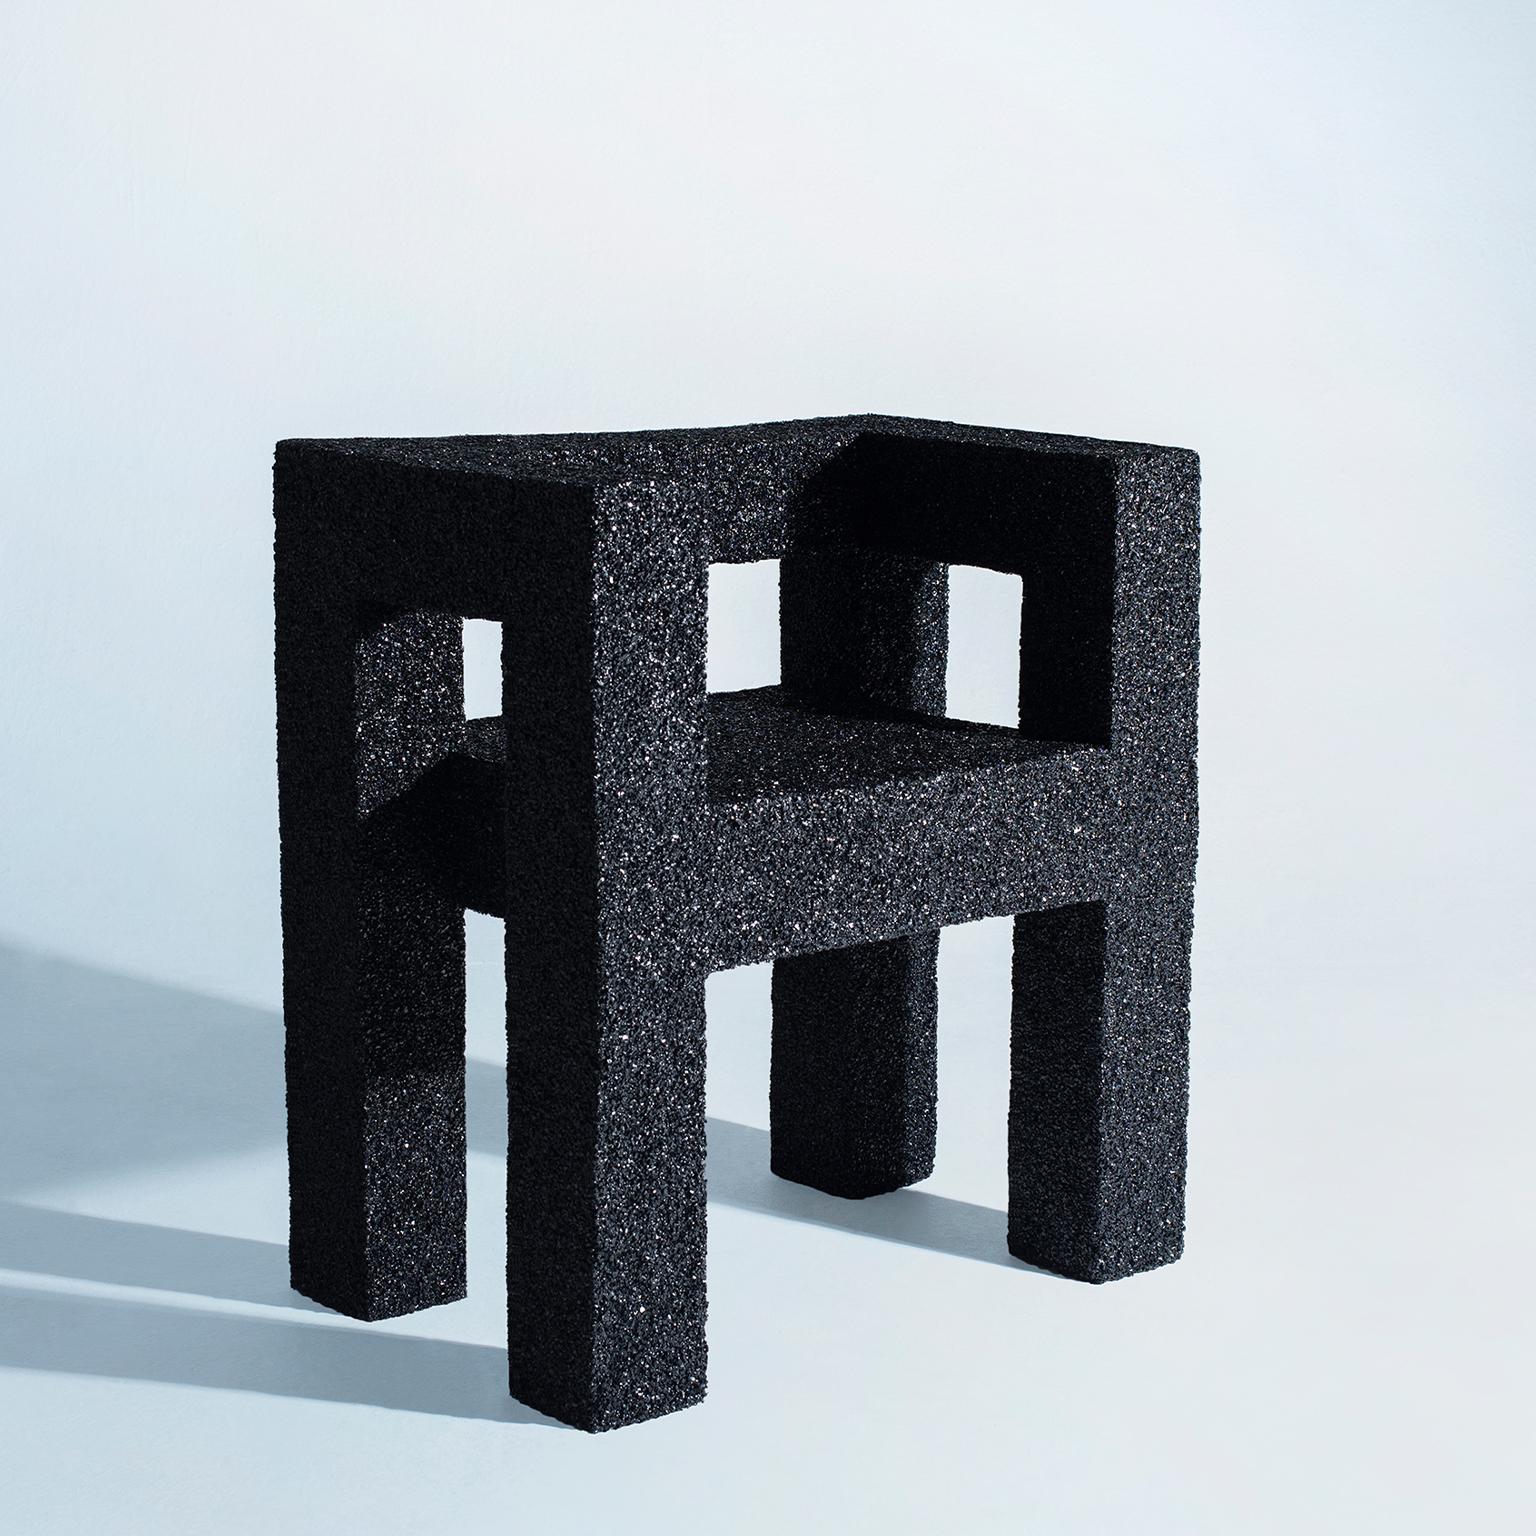 Contemporary chair One is Presented by Aufgabe Null, 2020

Our digital reality is smooth and perfect. High definition is standard. EDPM granules, on the other hand, is a material with low resolution. Like voxel, fragments unite to form a larger